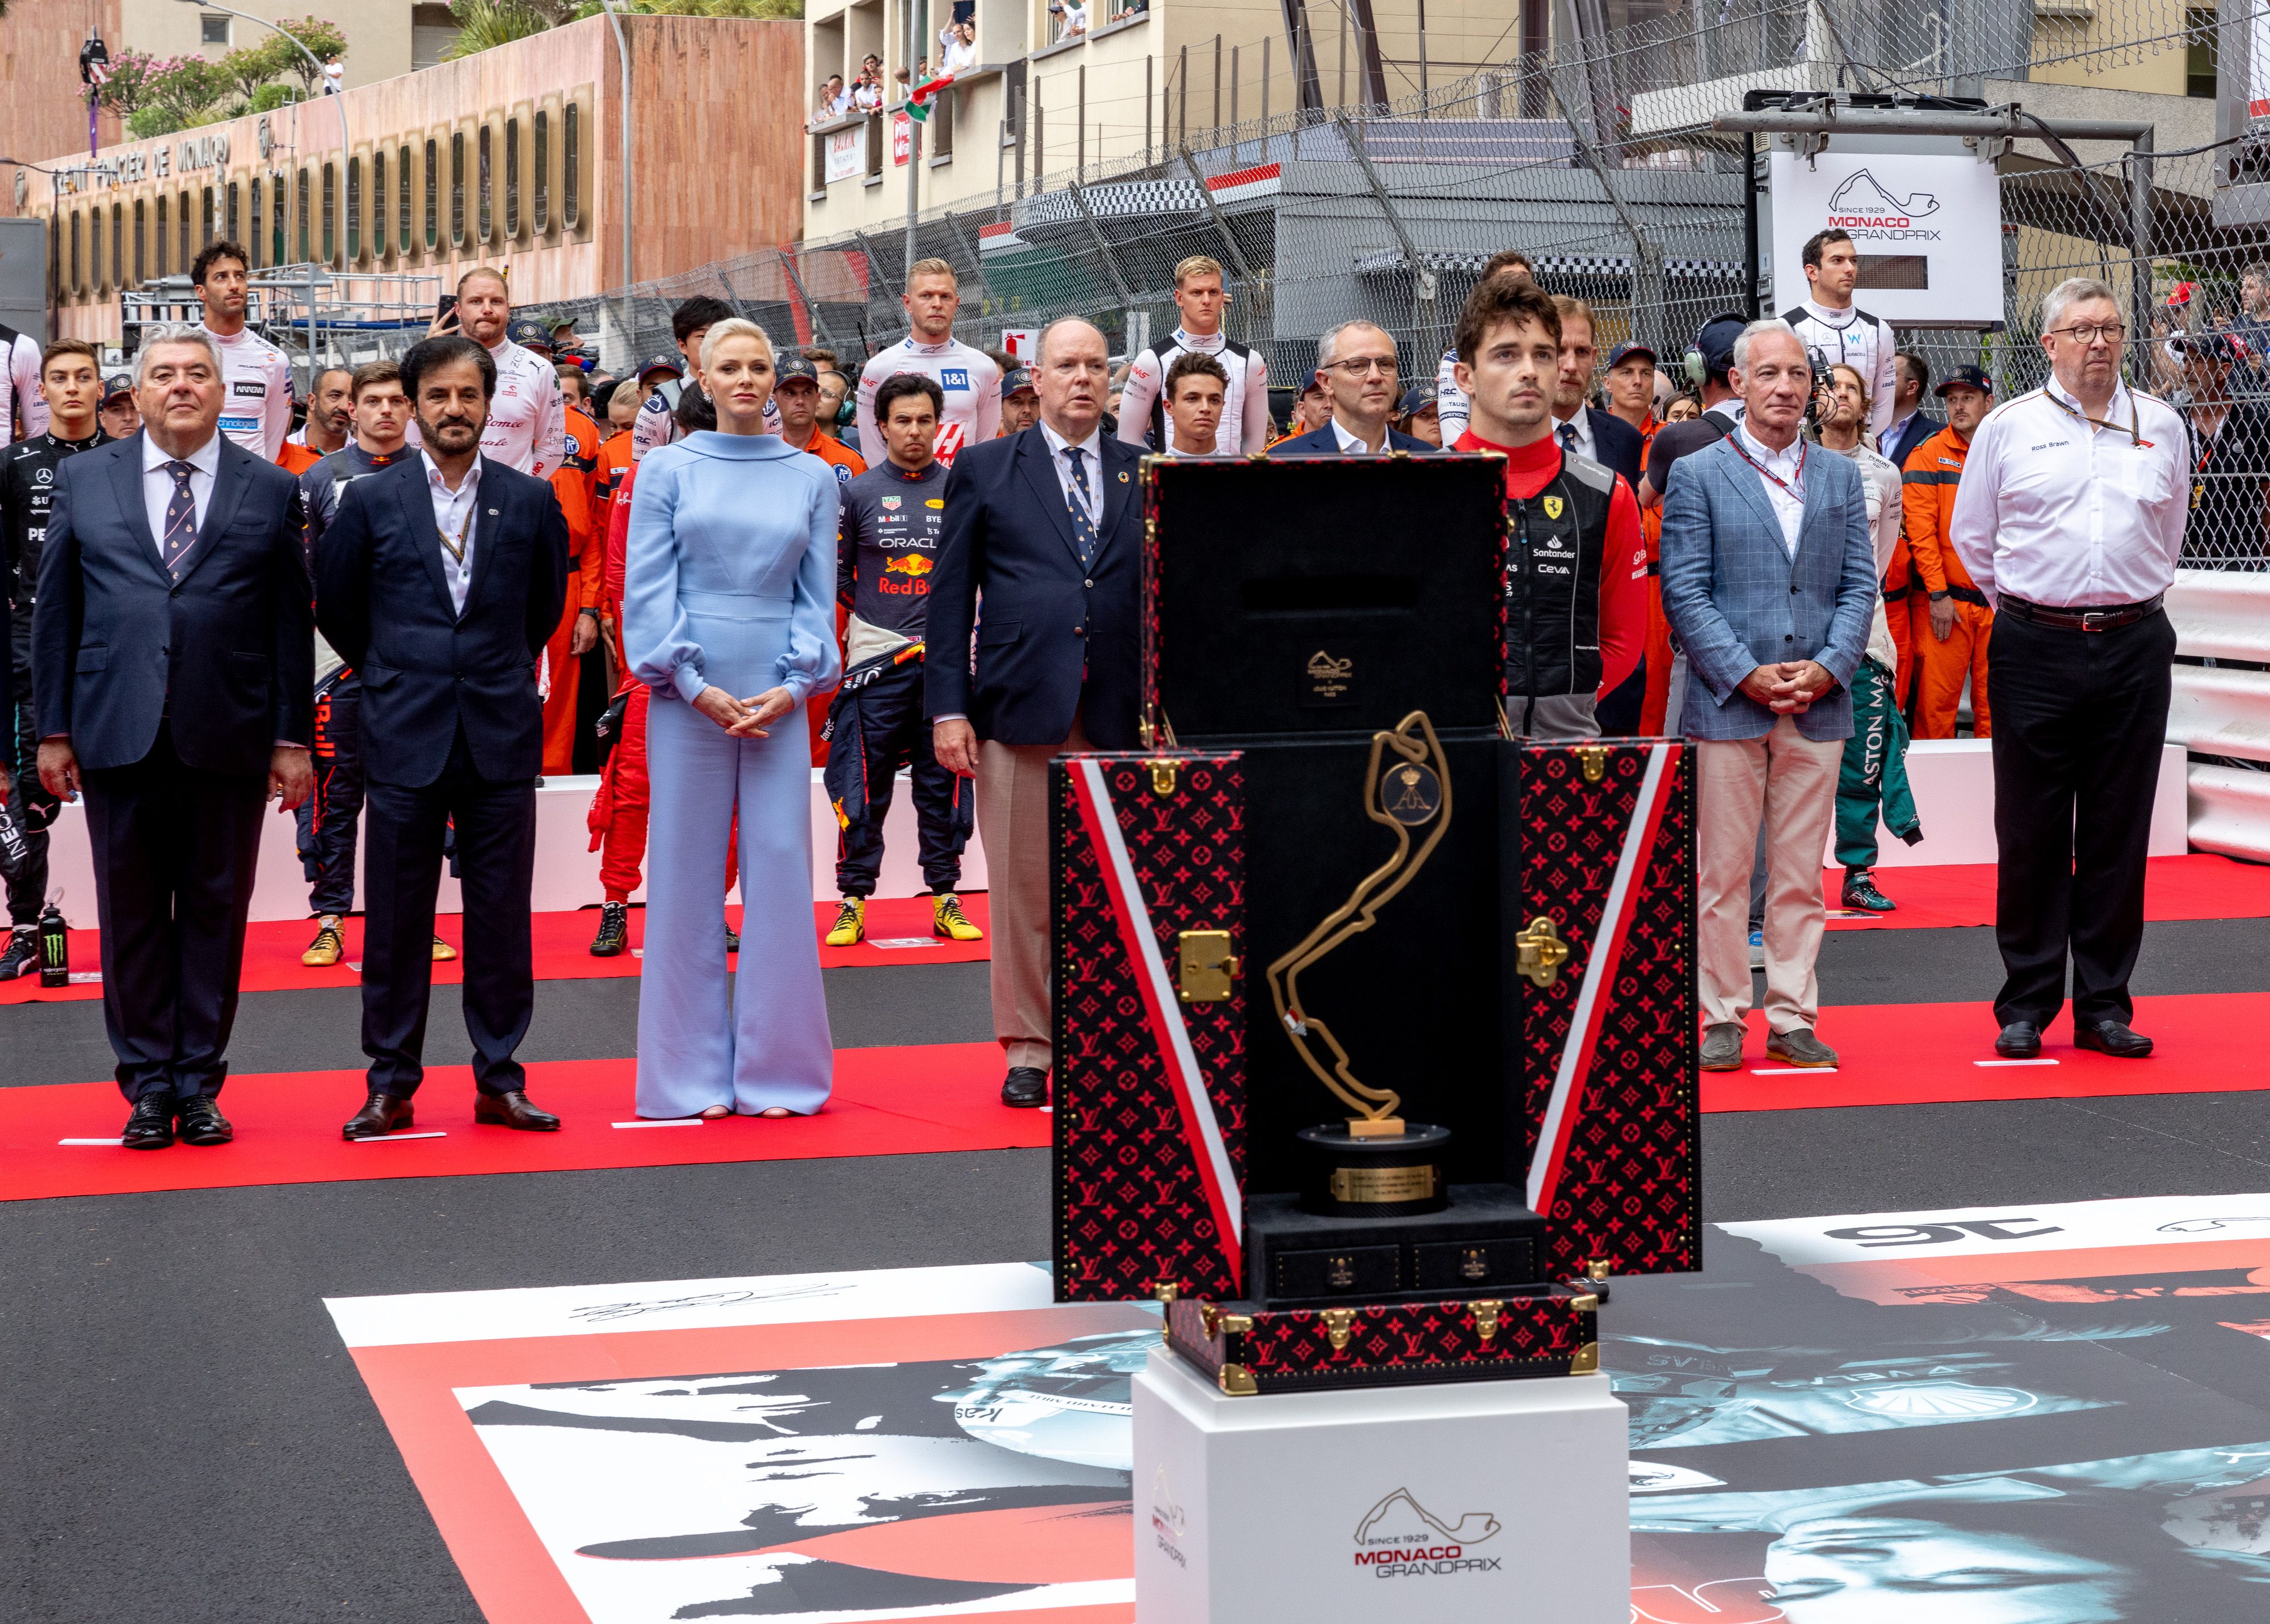 Louis Vuitton Has Created a Bespoke Case for This Year's Monaco Grand Prix  Trophy